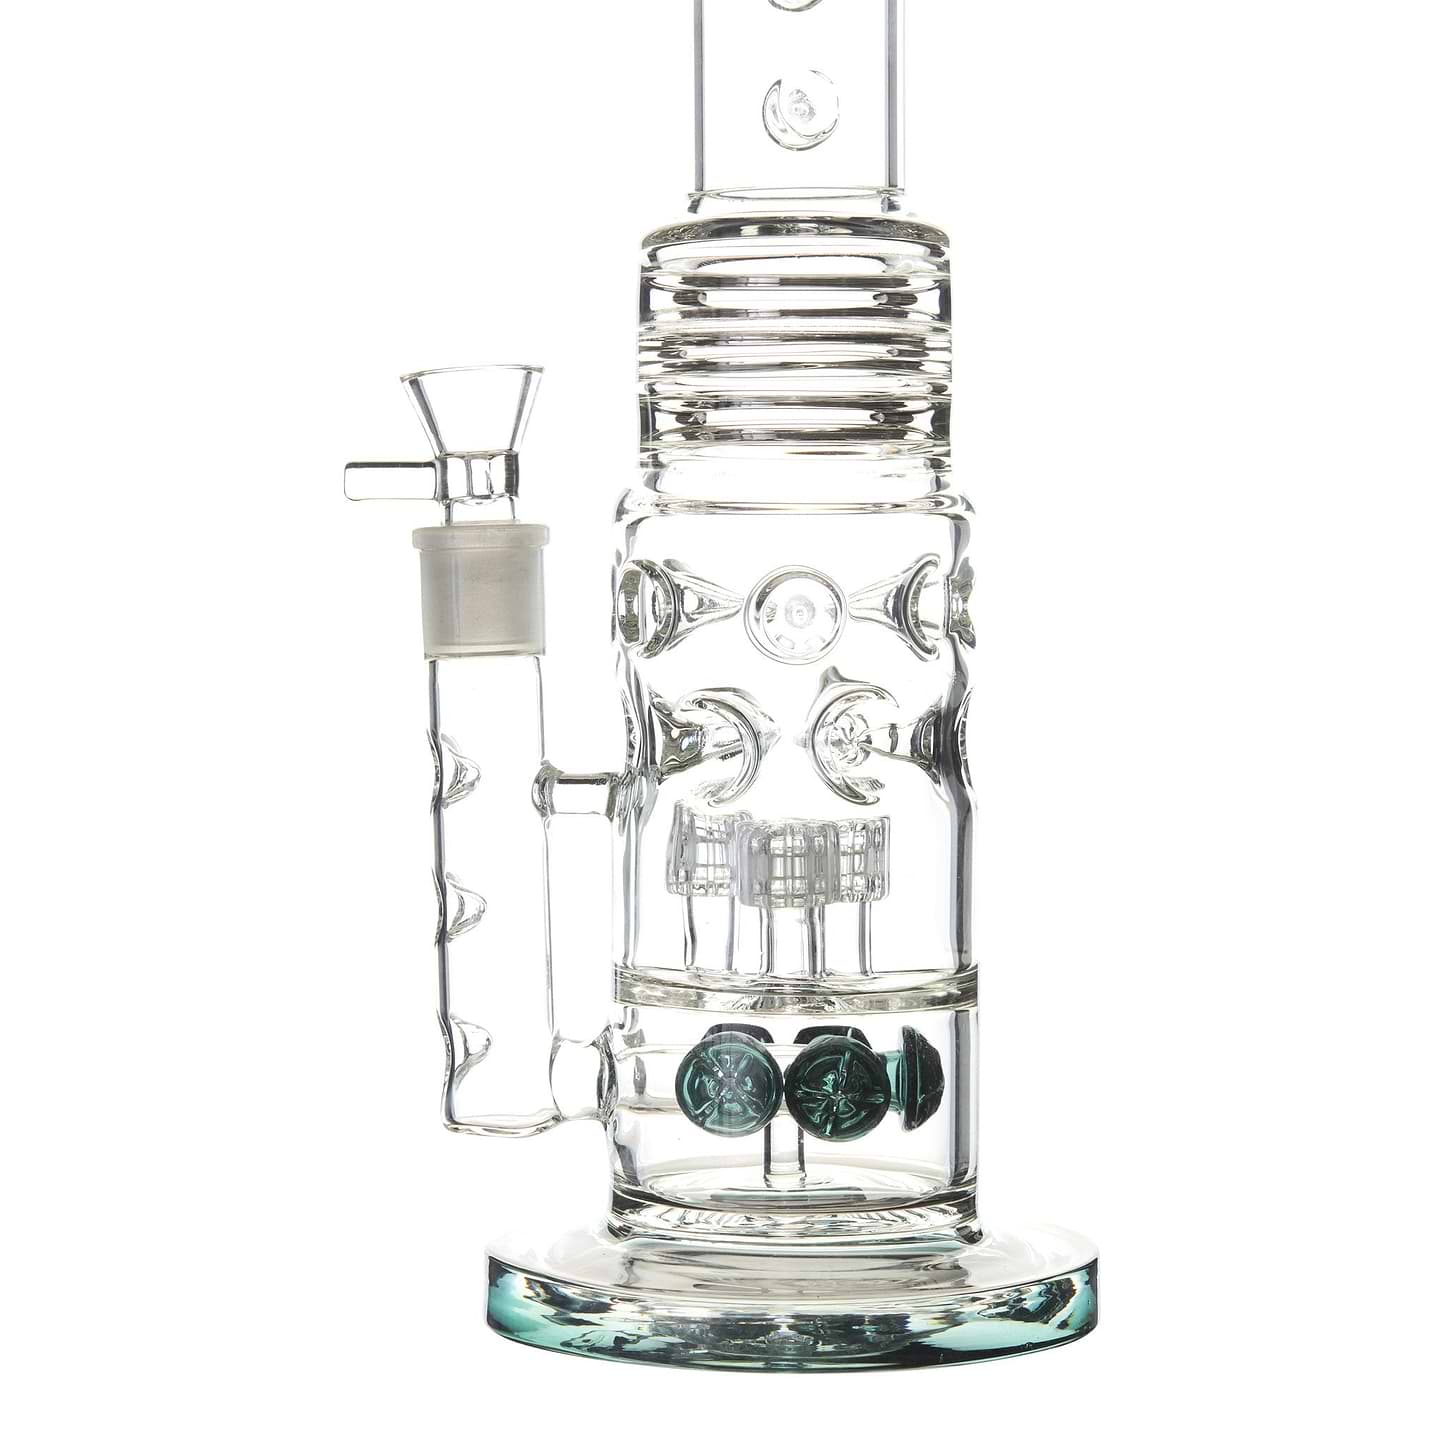 Teal 16-inch glass monster bong smoking device with 8 percs built-in splashguards sturdy base clean look